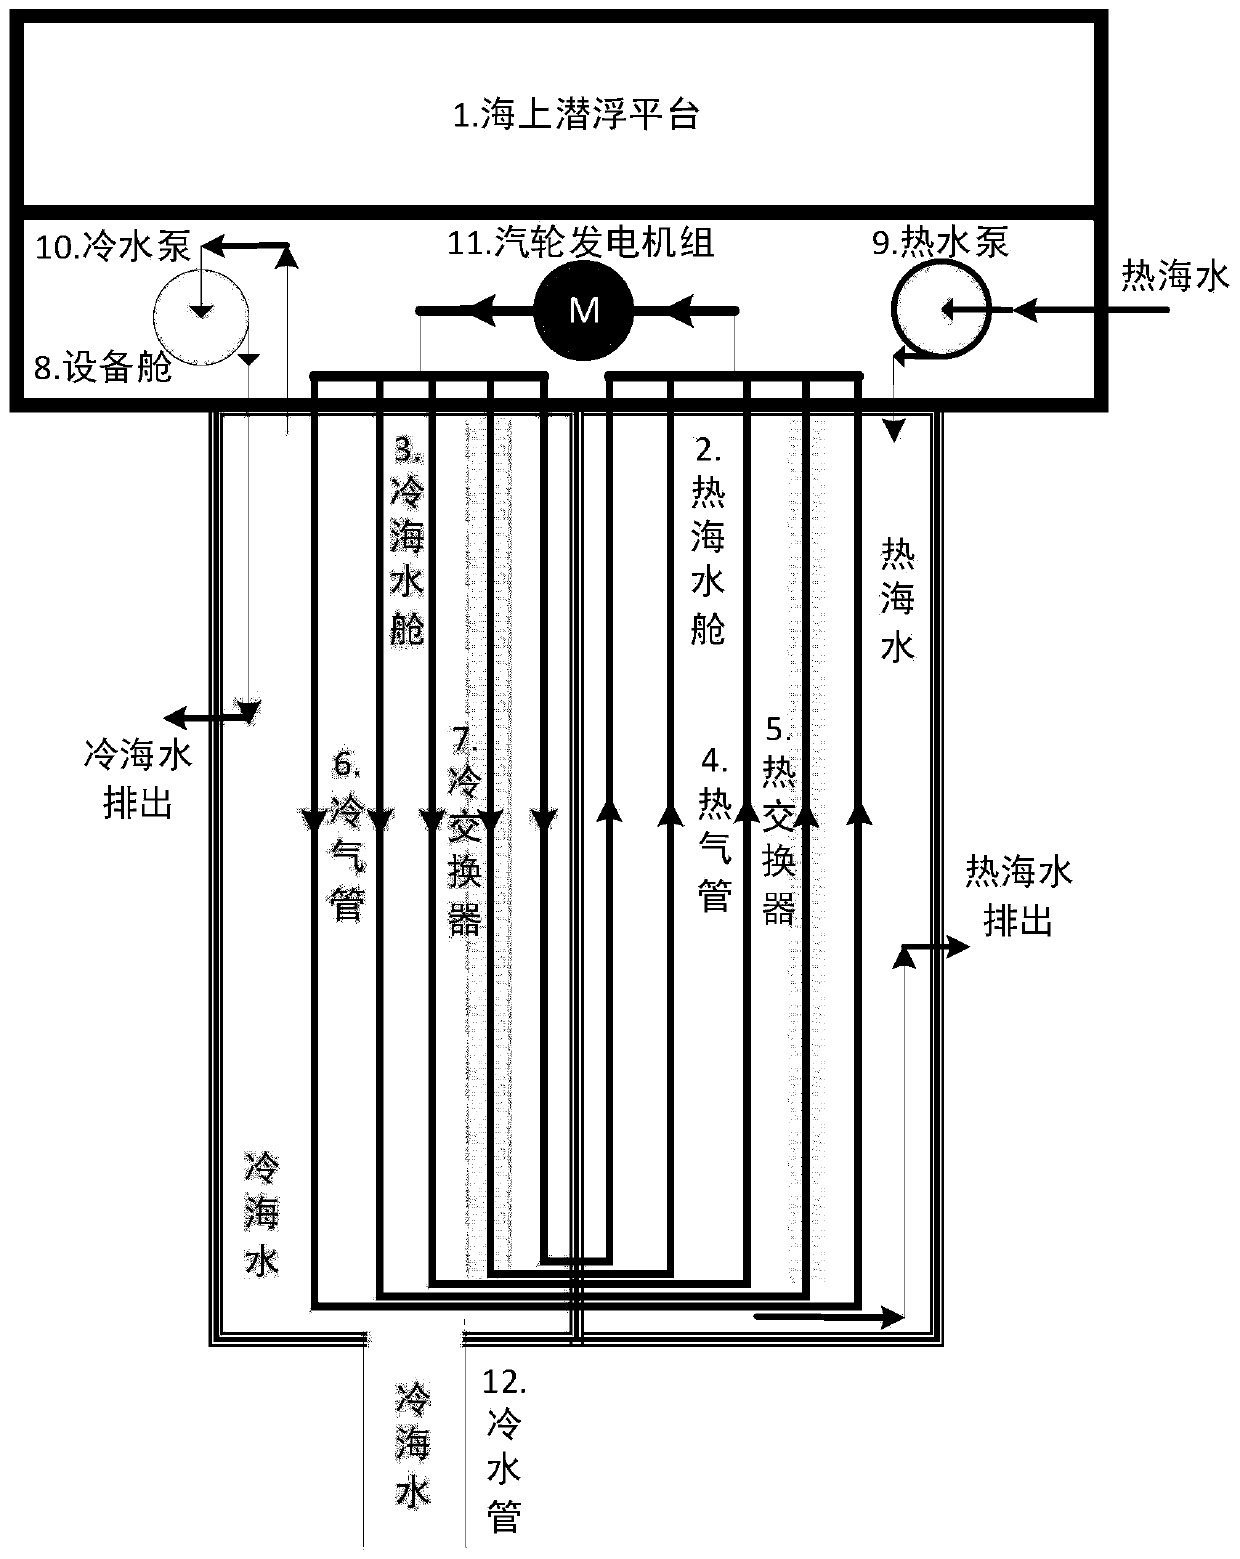 High-pressure gas potential enthalpy circulation type power generation device